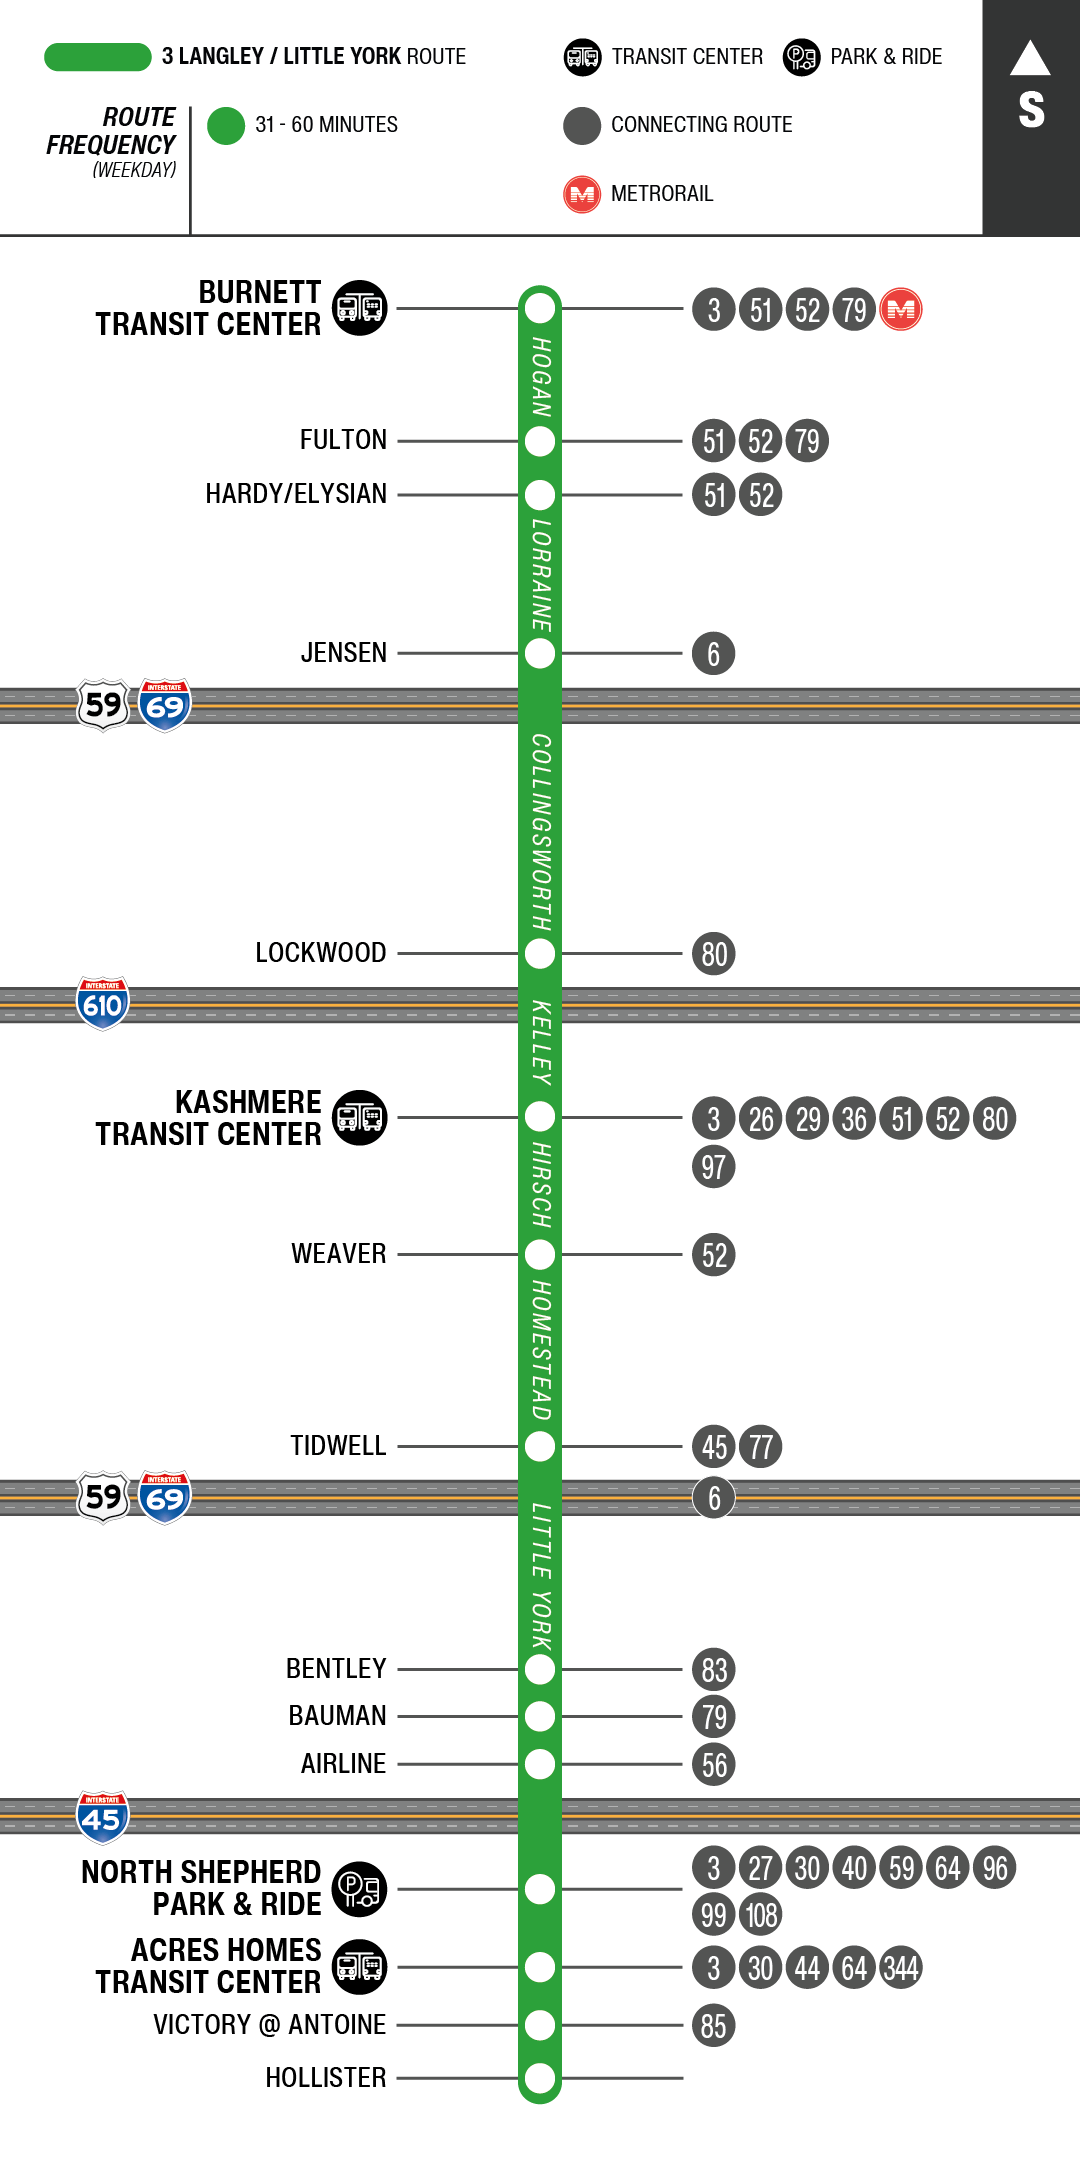 Route map for 3 Langley / Little York bus